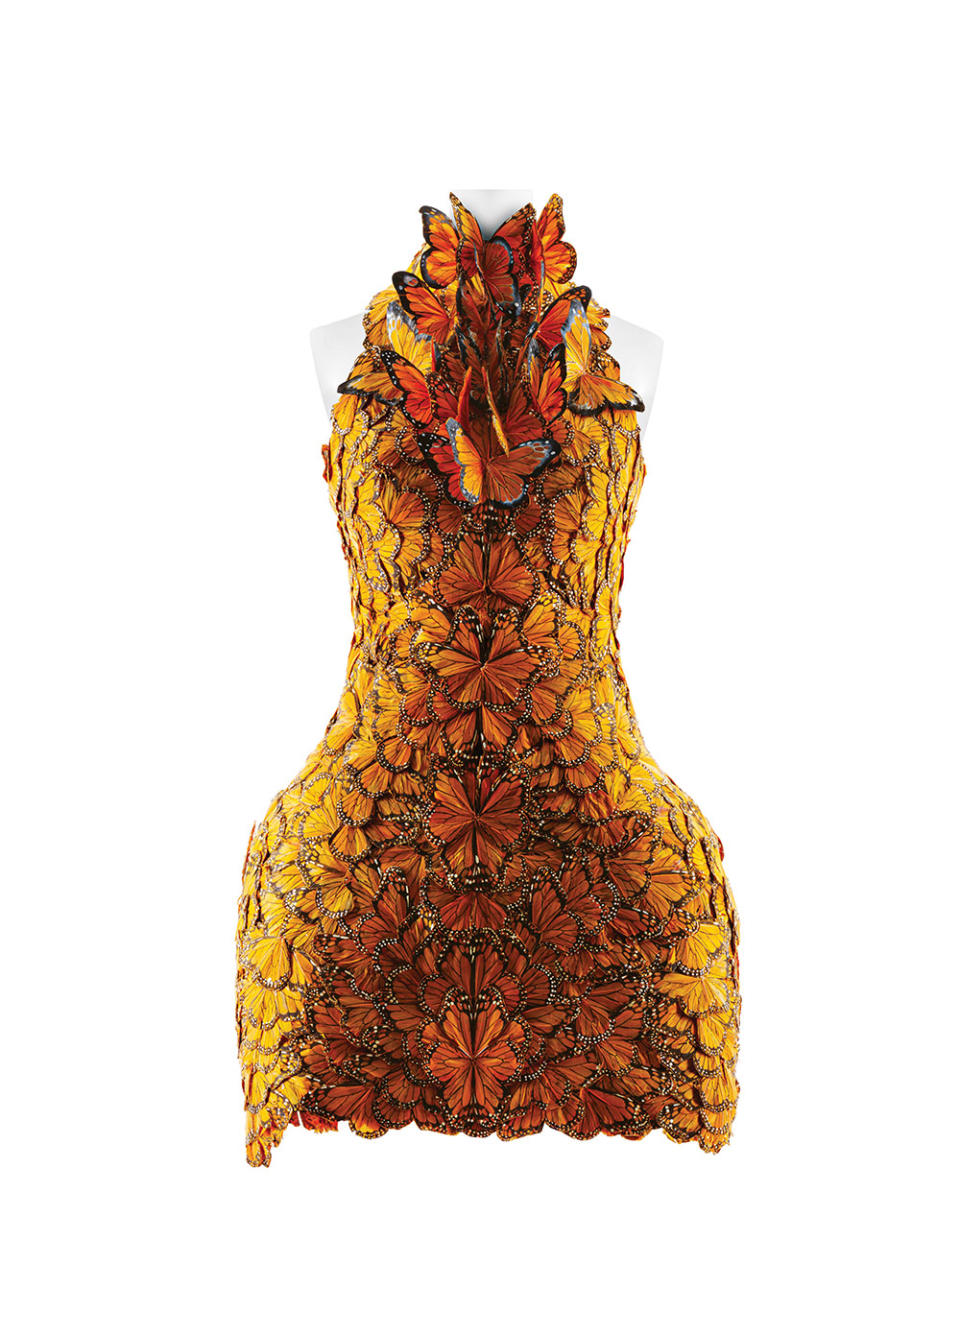 On display will be Sarah Burton’s 2011 butterfly-embellished dress for Alexander McQueen, a design worn by Elizabeth Banks in The Hunger Games.